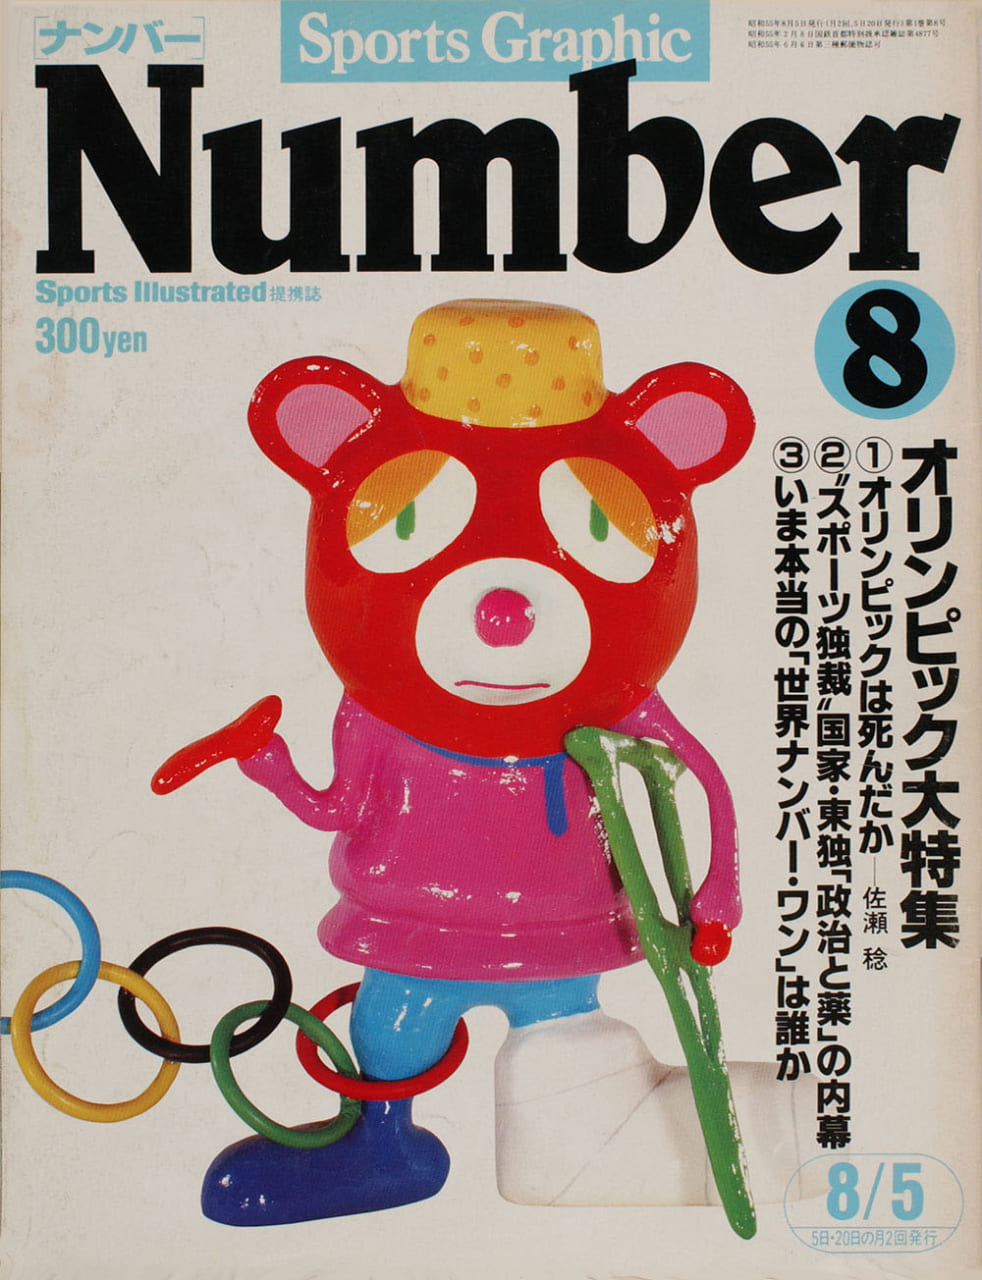 Sports Graphic Number 8号　
1980年7月18日発売　
表紙イラスト：林恭三